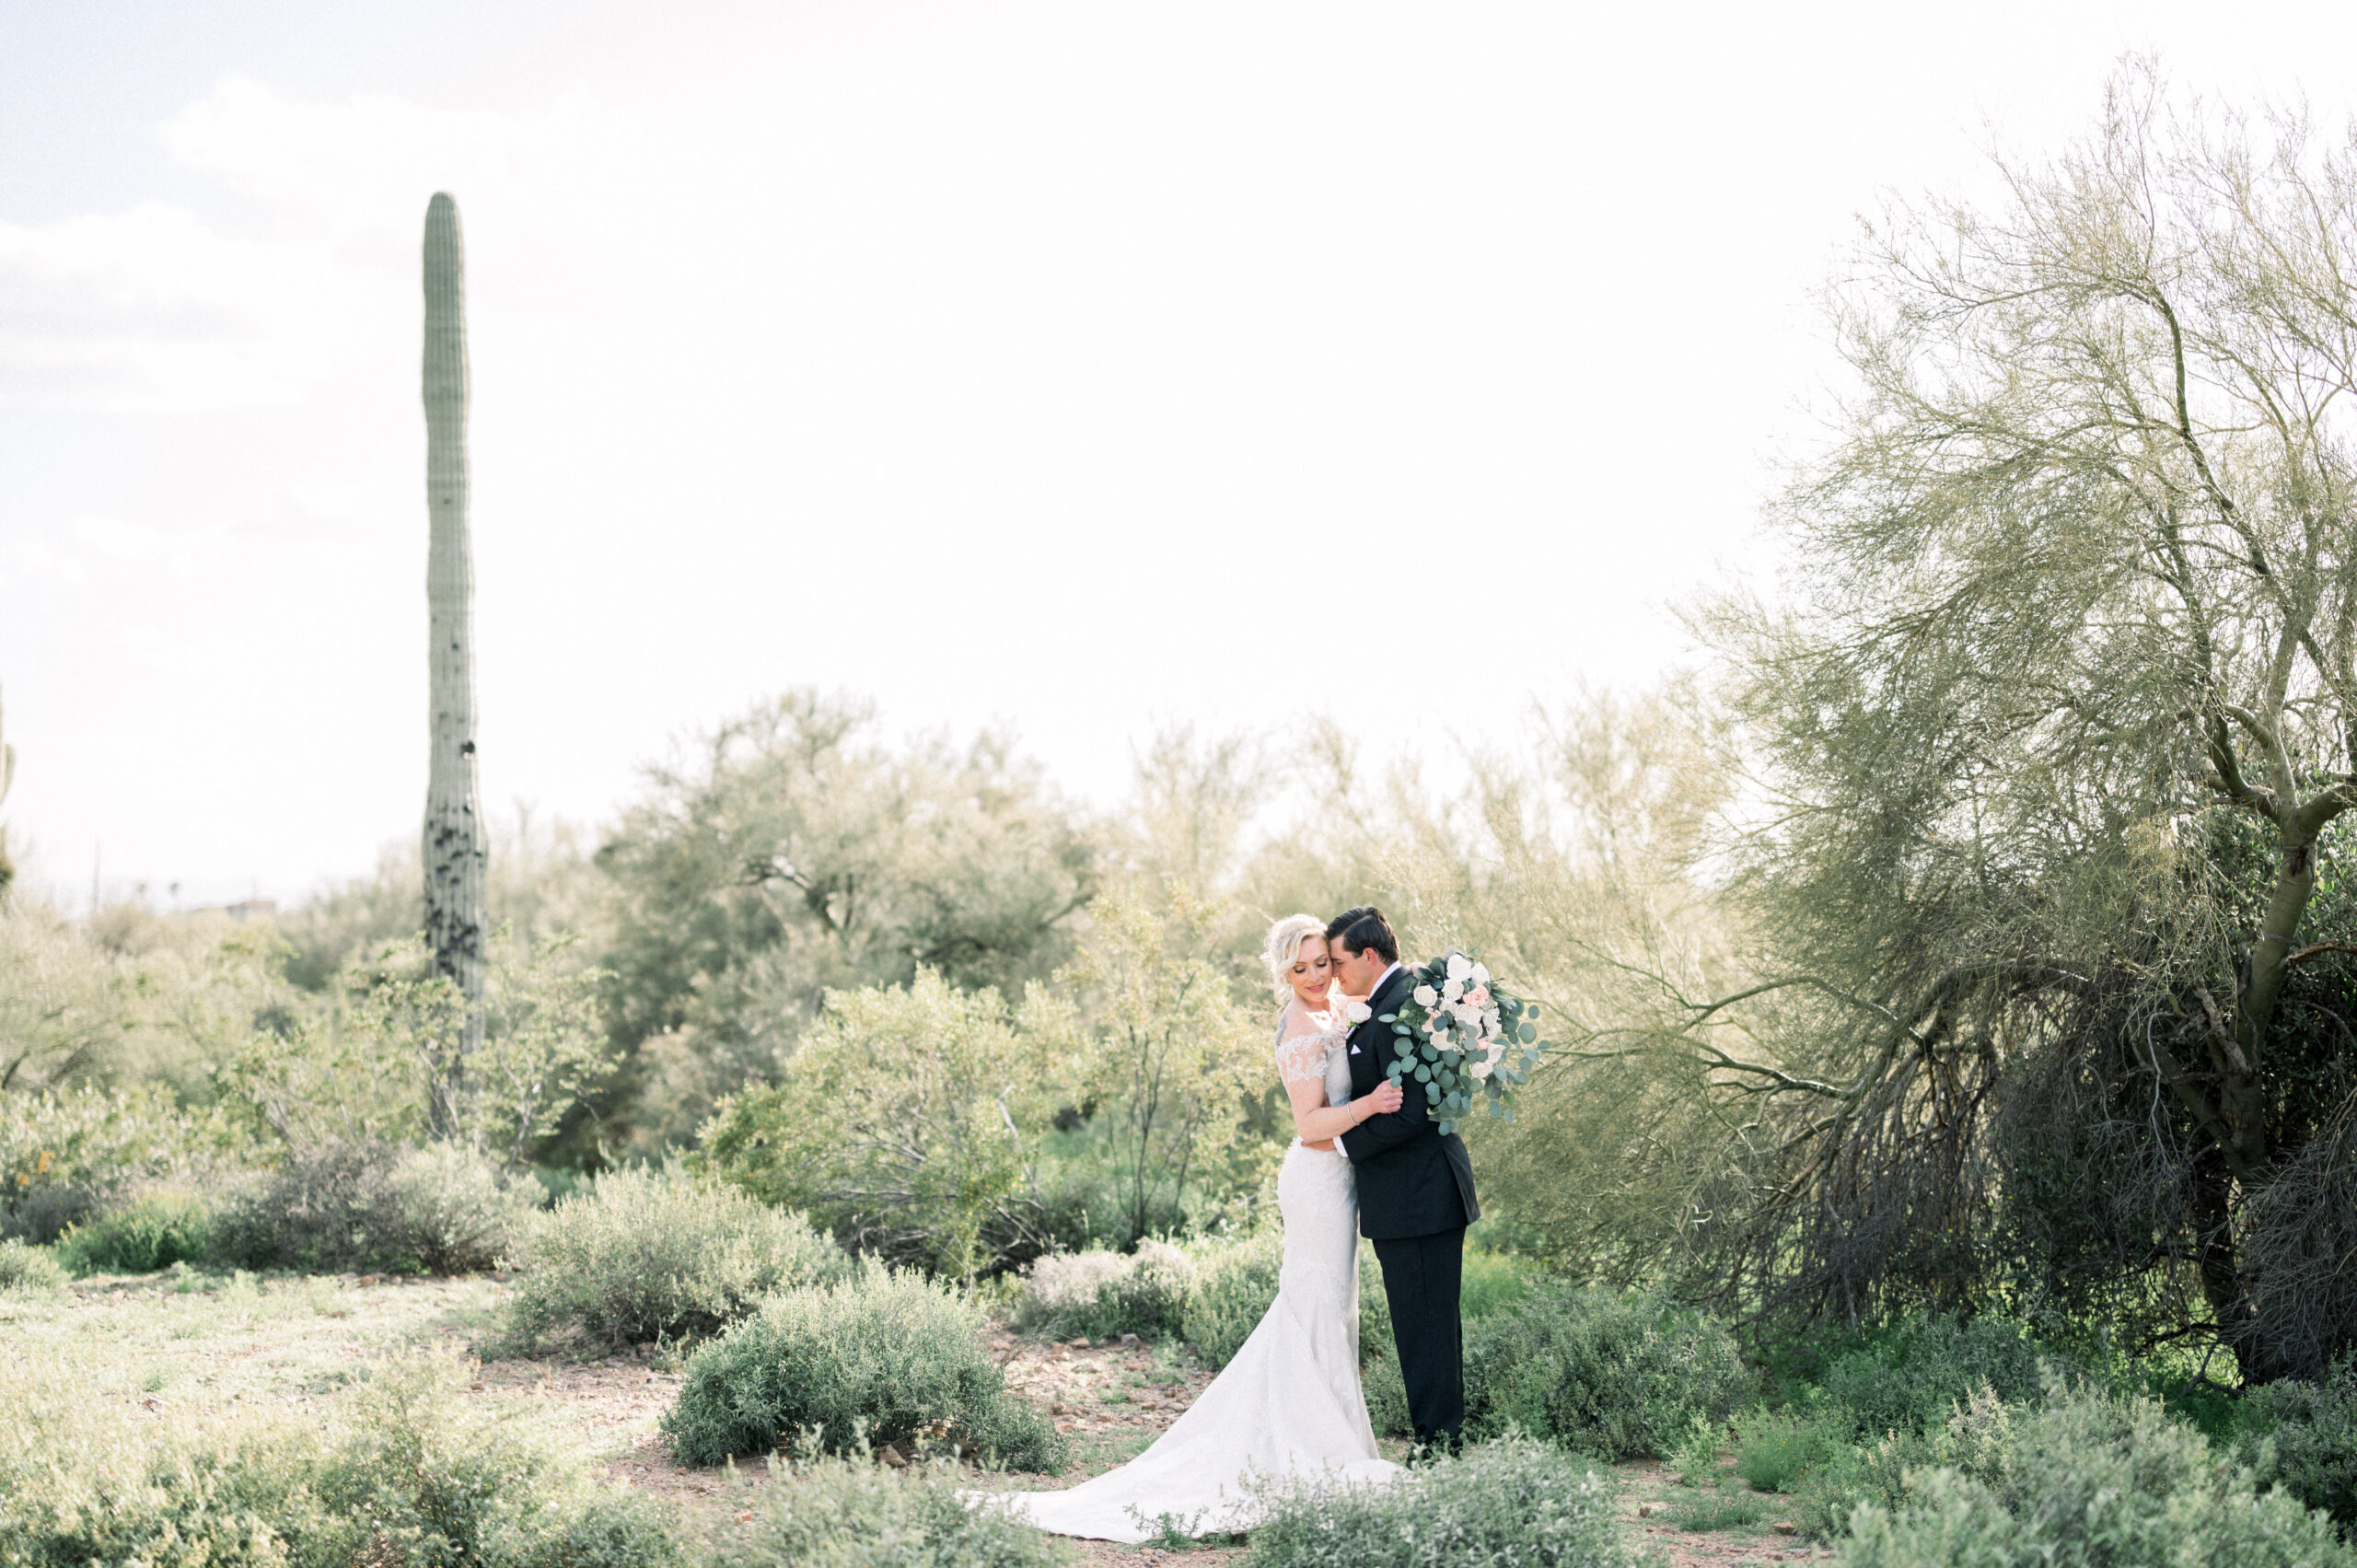 Claire and Chase's Superstition Mountains spring wedding at Lost Dutchman was such a meaningful and beautiful celebration with their friends and family.